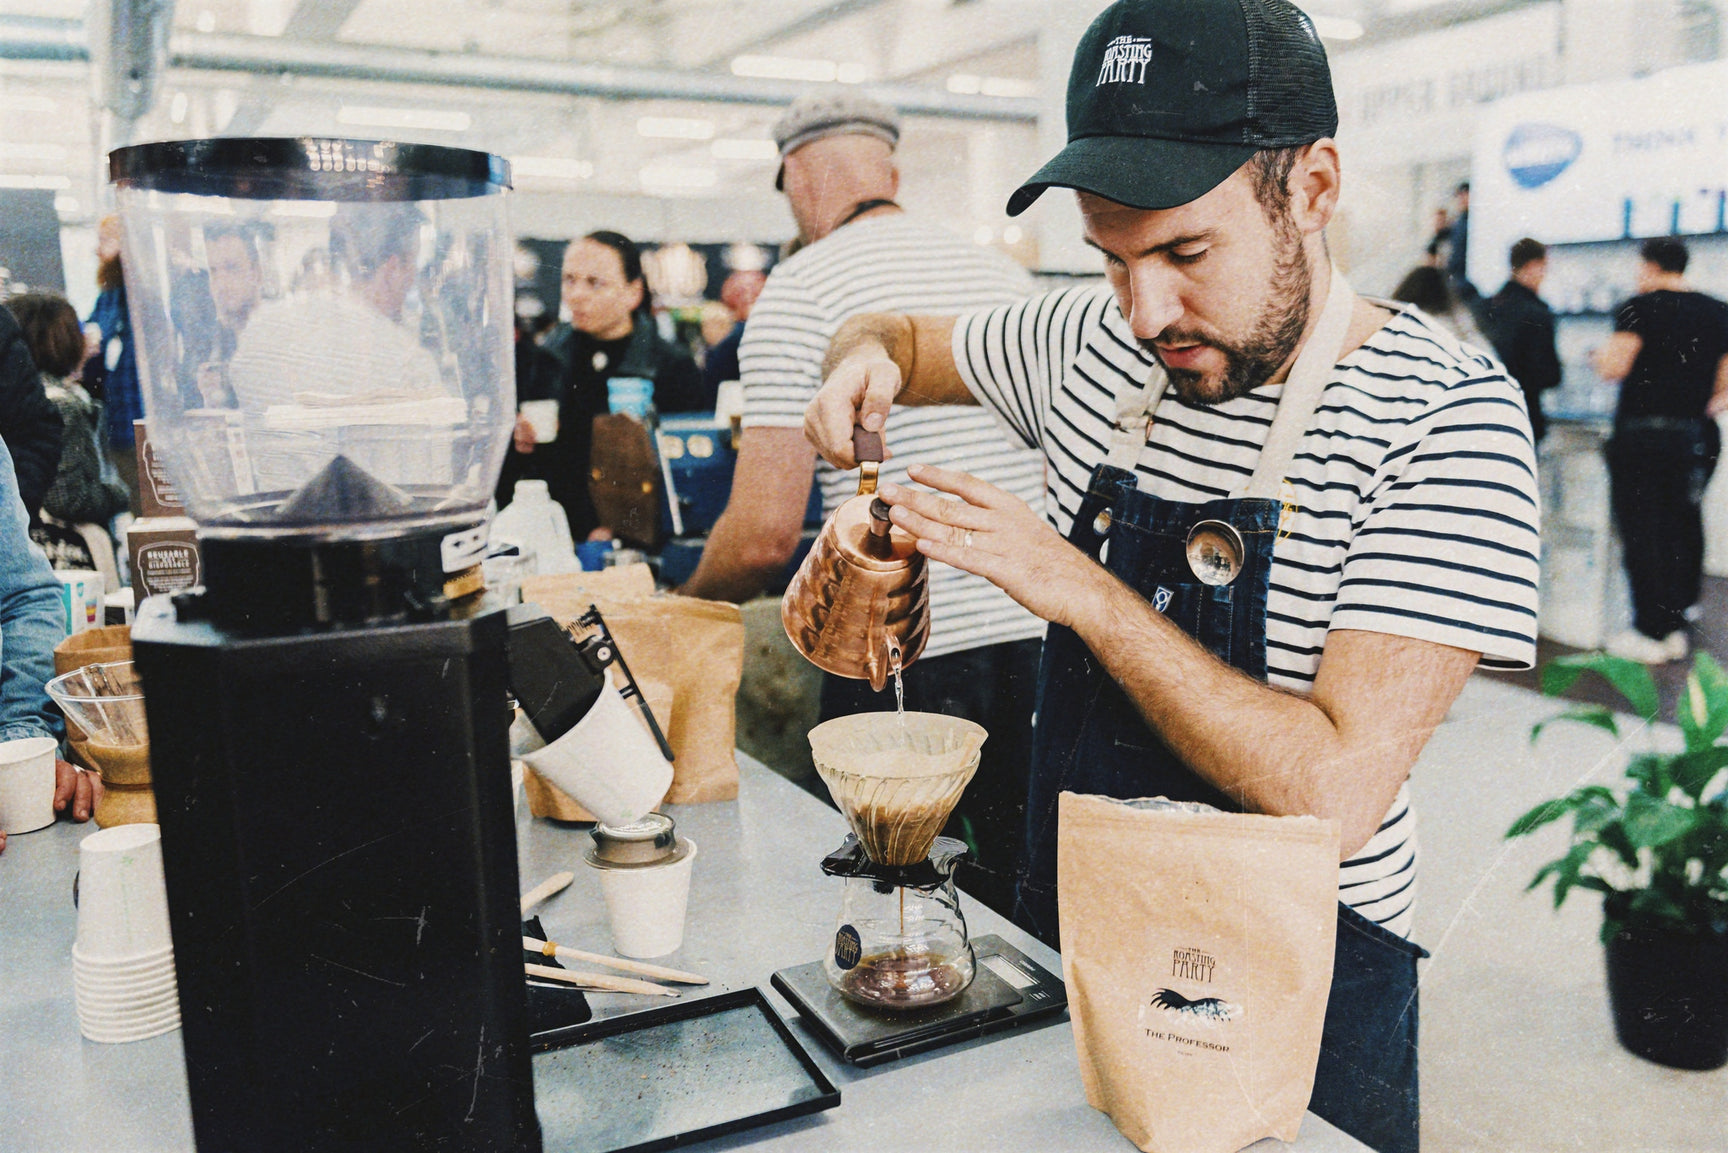 THROWING IT BACK TO THE LONDON COFFEE FESTIVAL 2021